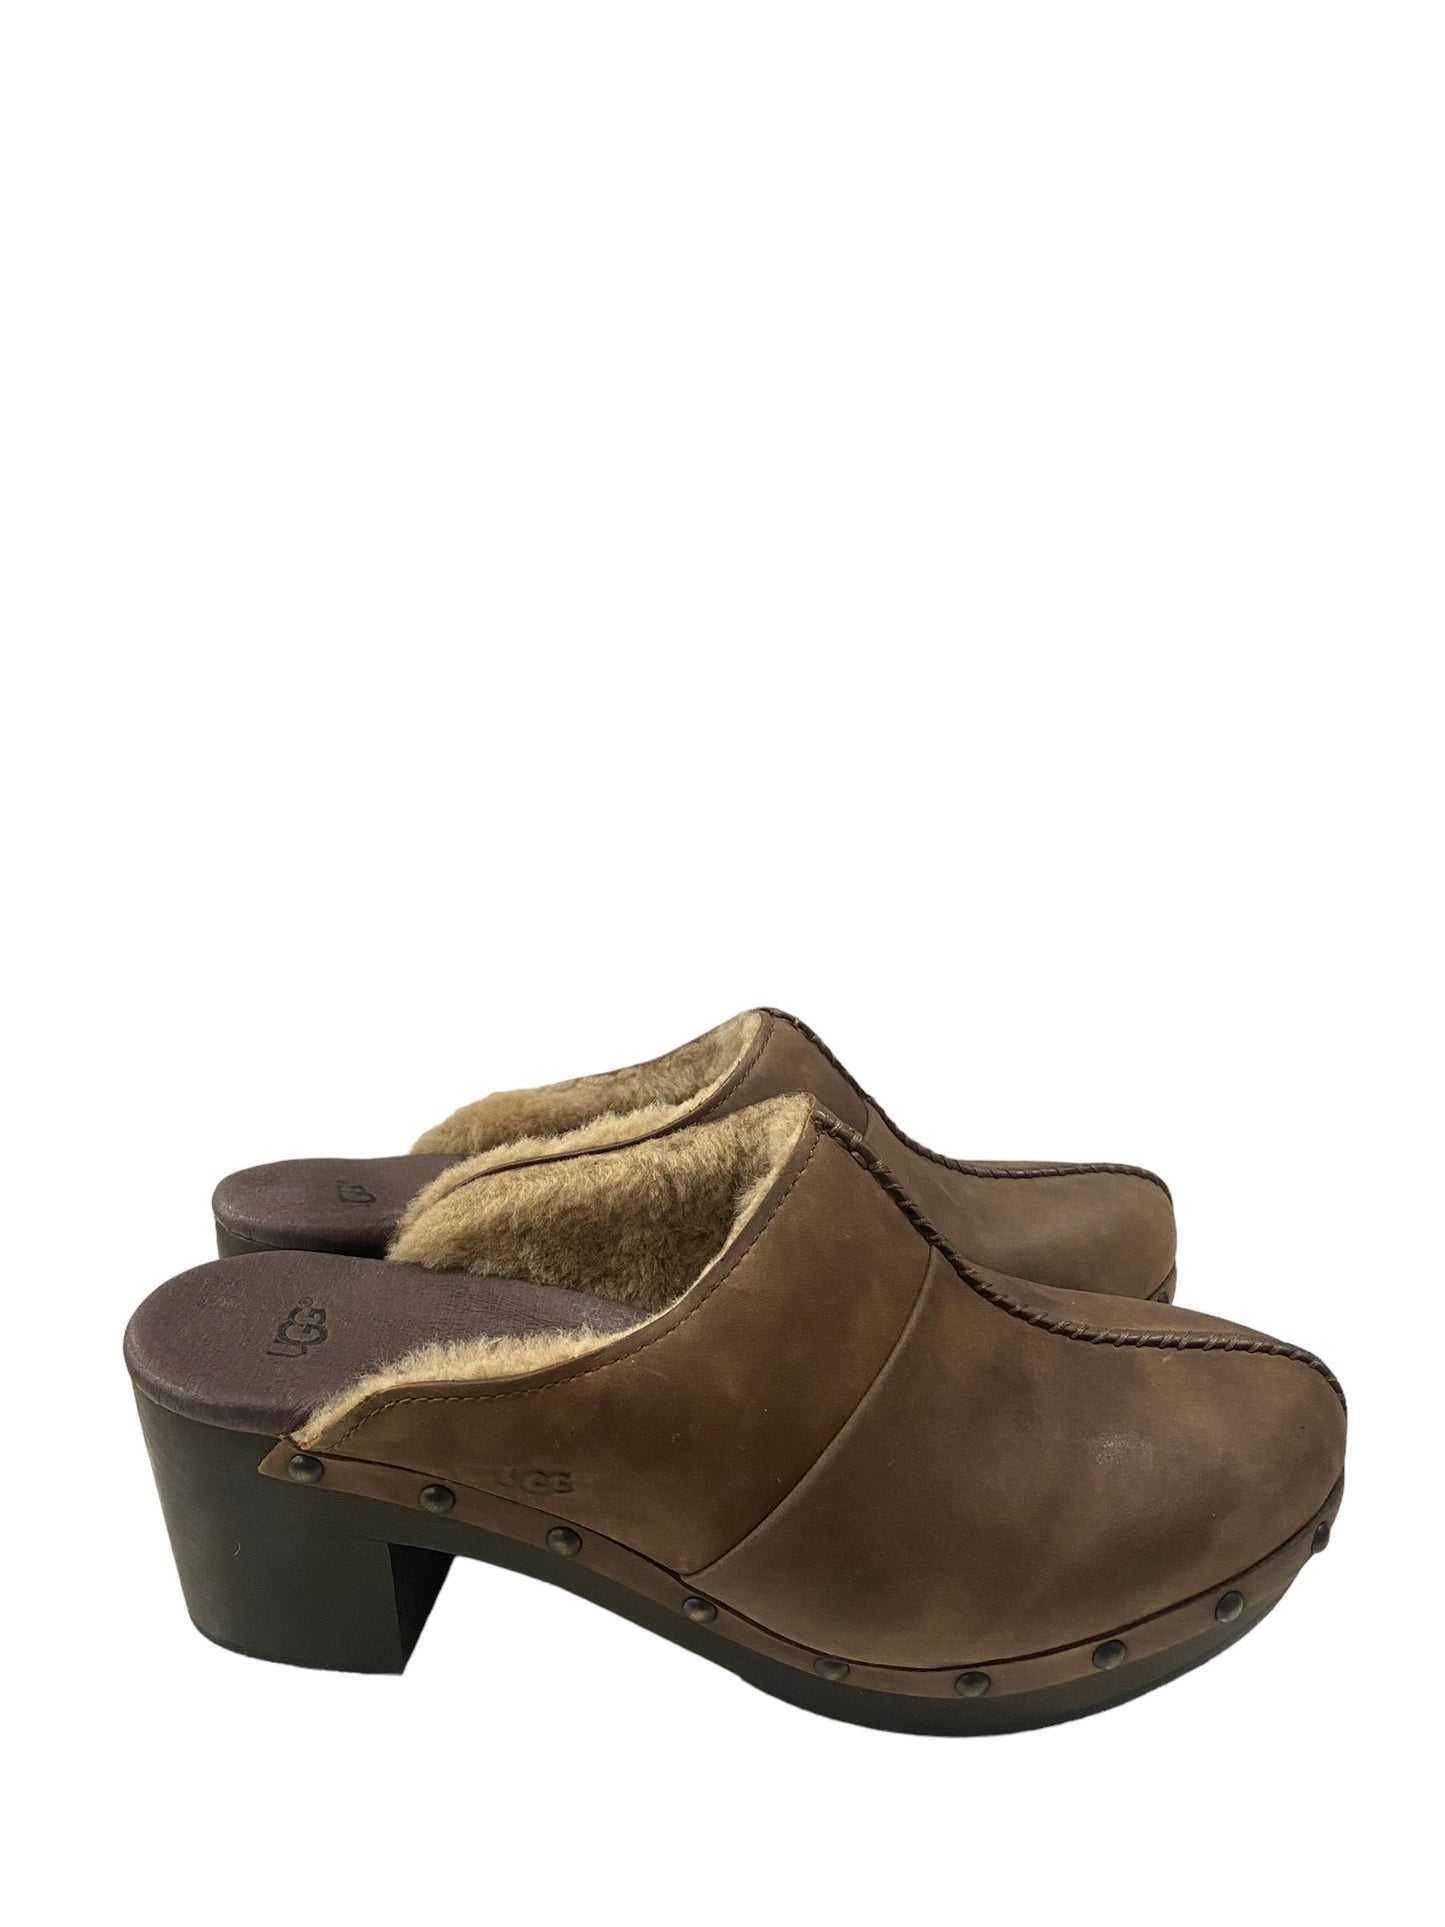 Shoes Heels Block By Ugg  Size: 9